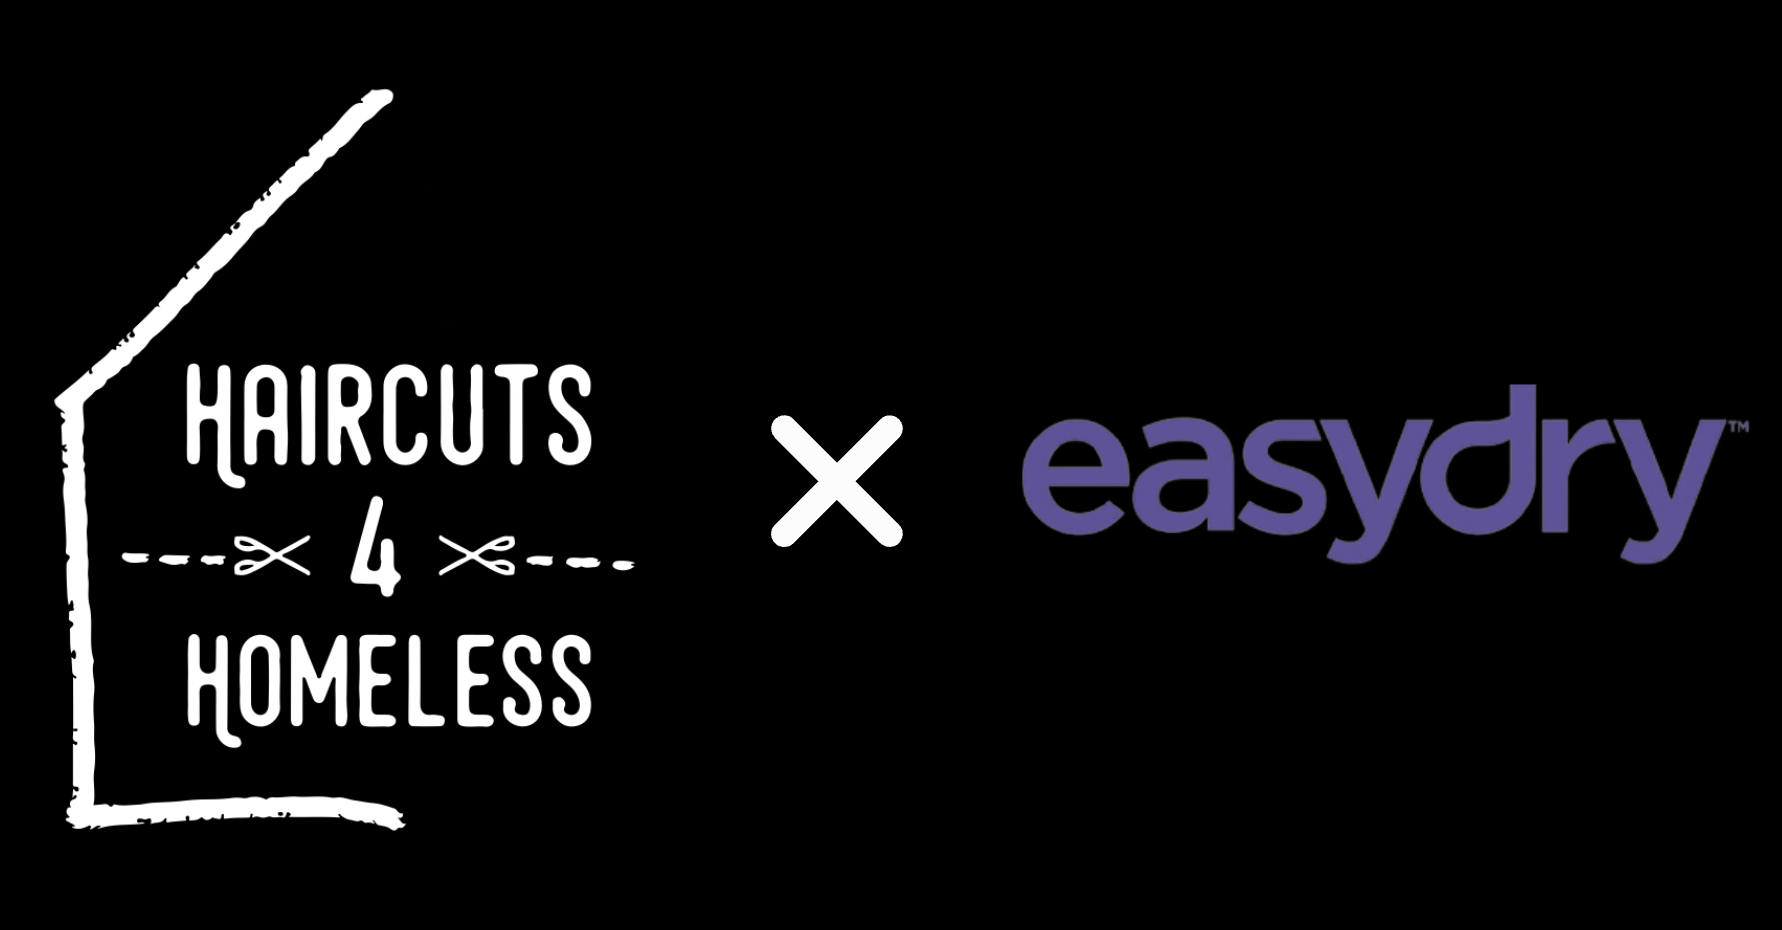 Easydry proud to support Haircuts4Homeless charity: we do this by providing them with eco-friendly hairdressing disposable towels.